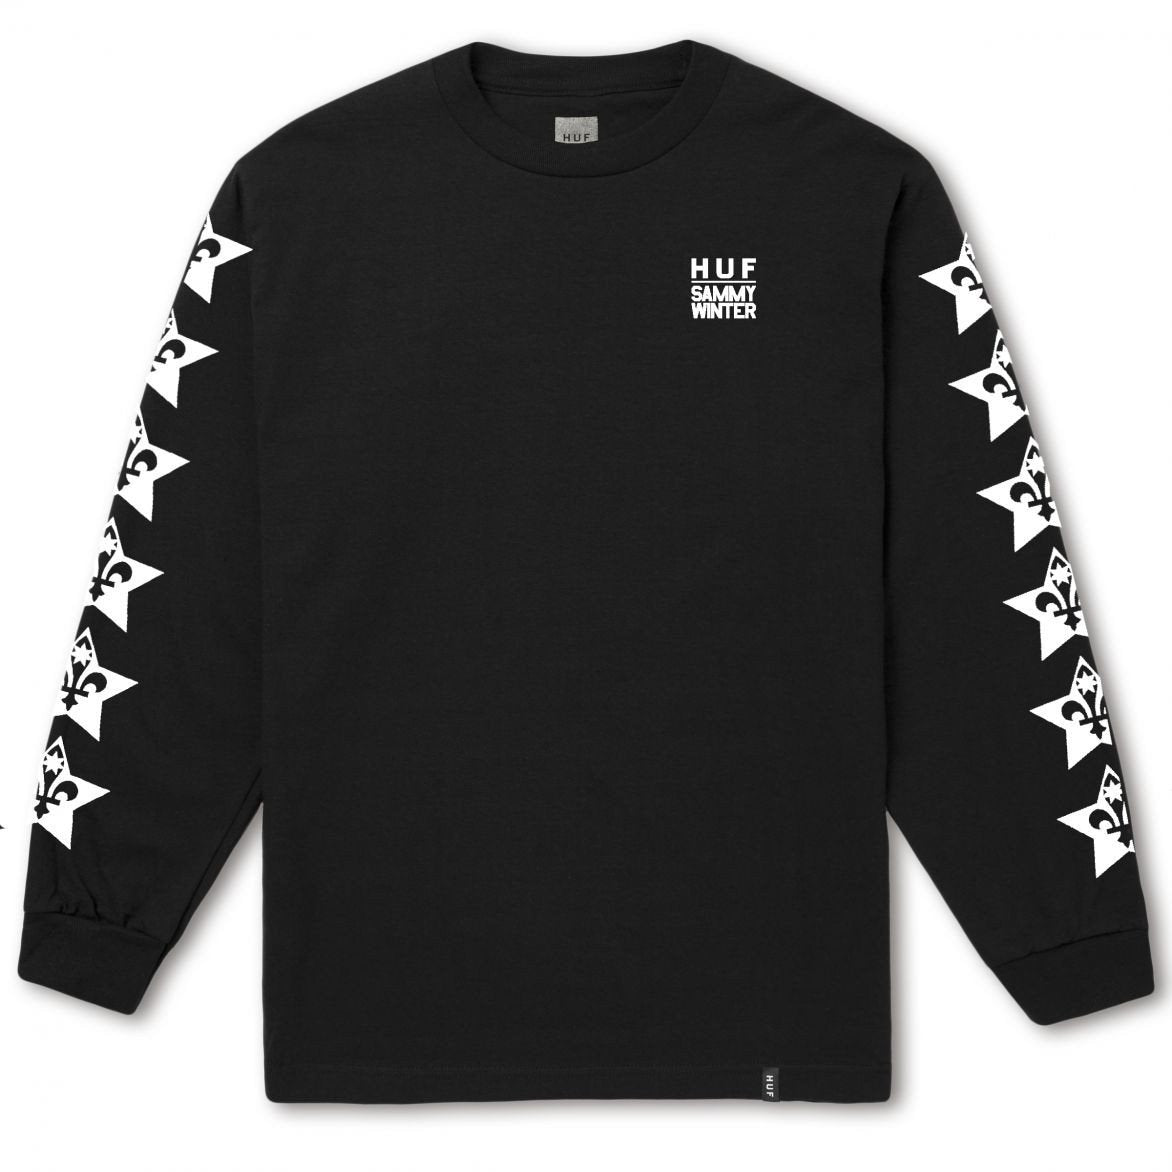 HUF X SAMMY WINTER LS TEE \\ BLACK-The Collateral